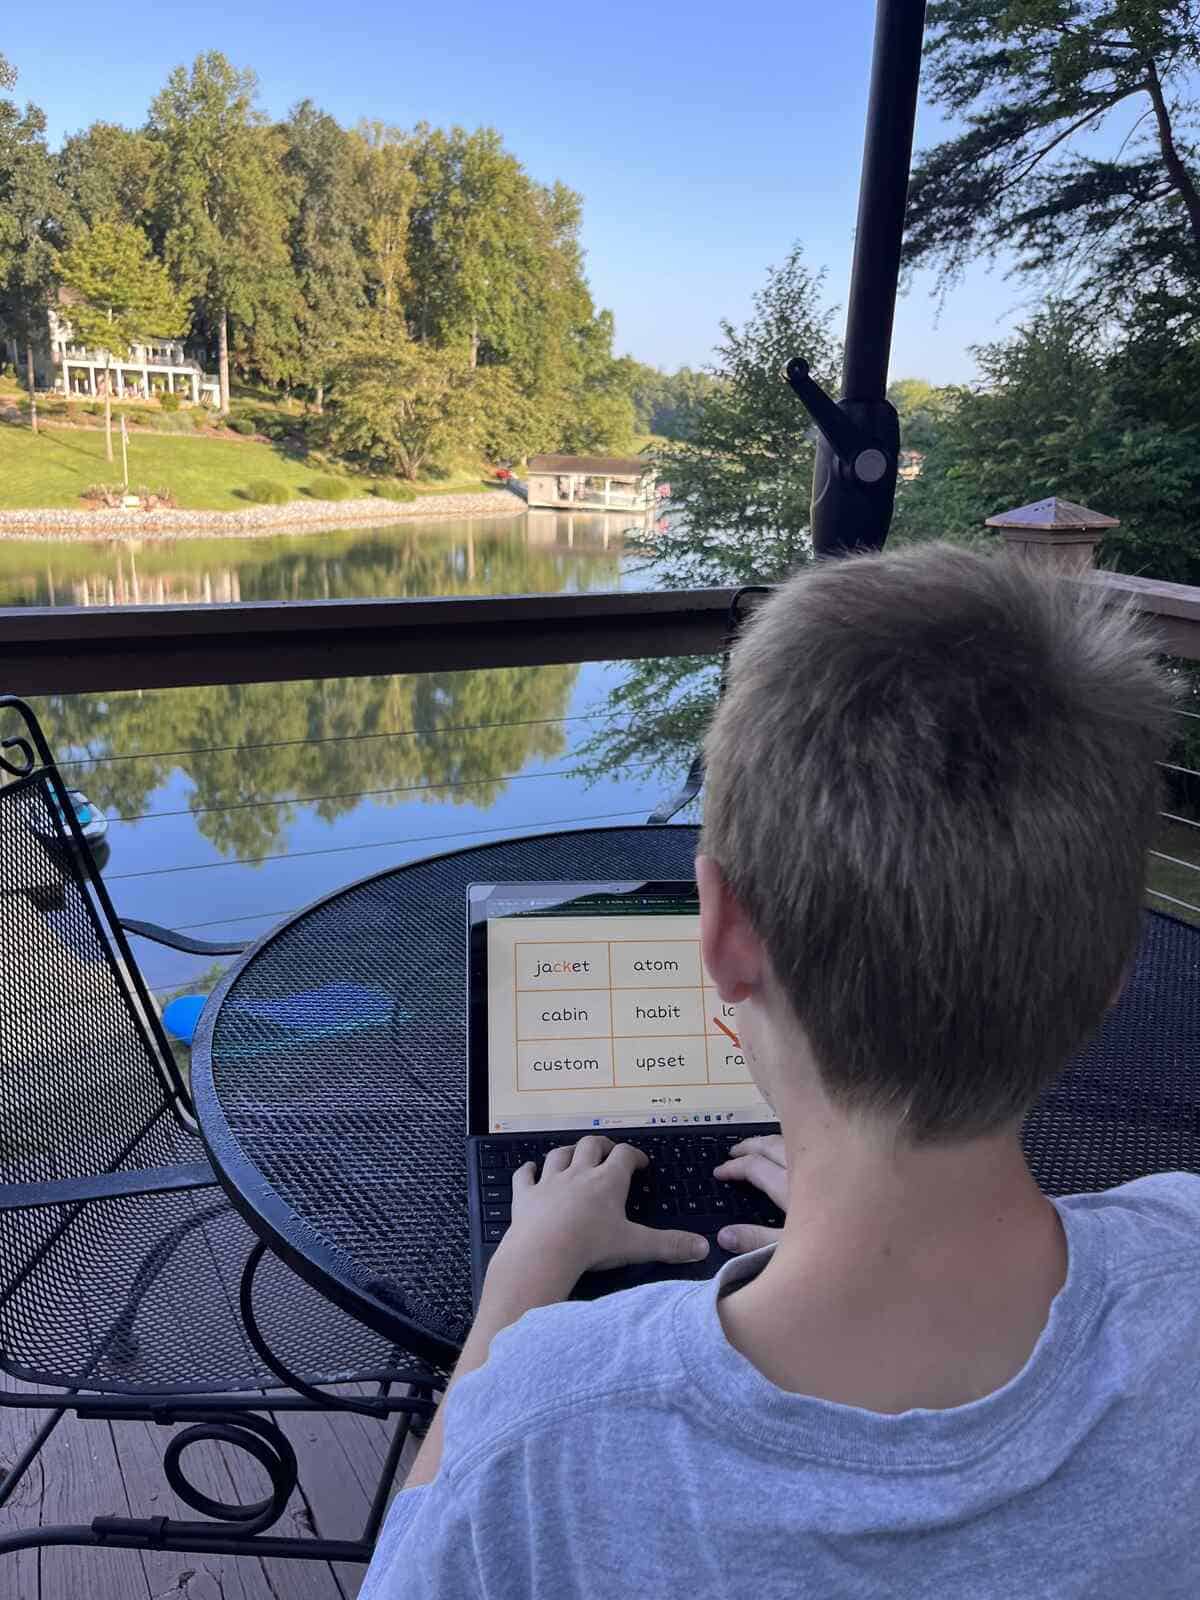 Photograph of a boy doing his lexercise basic therapy on the computer at the lake.